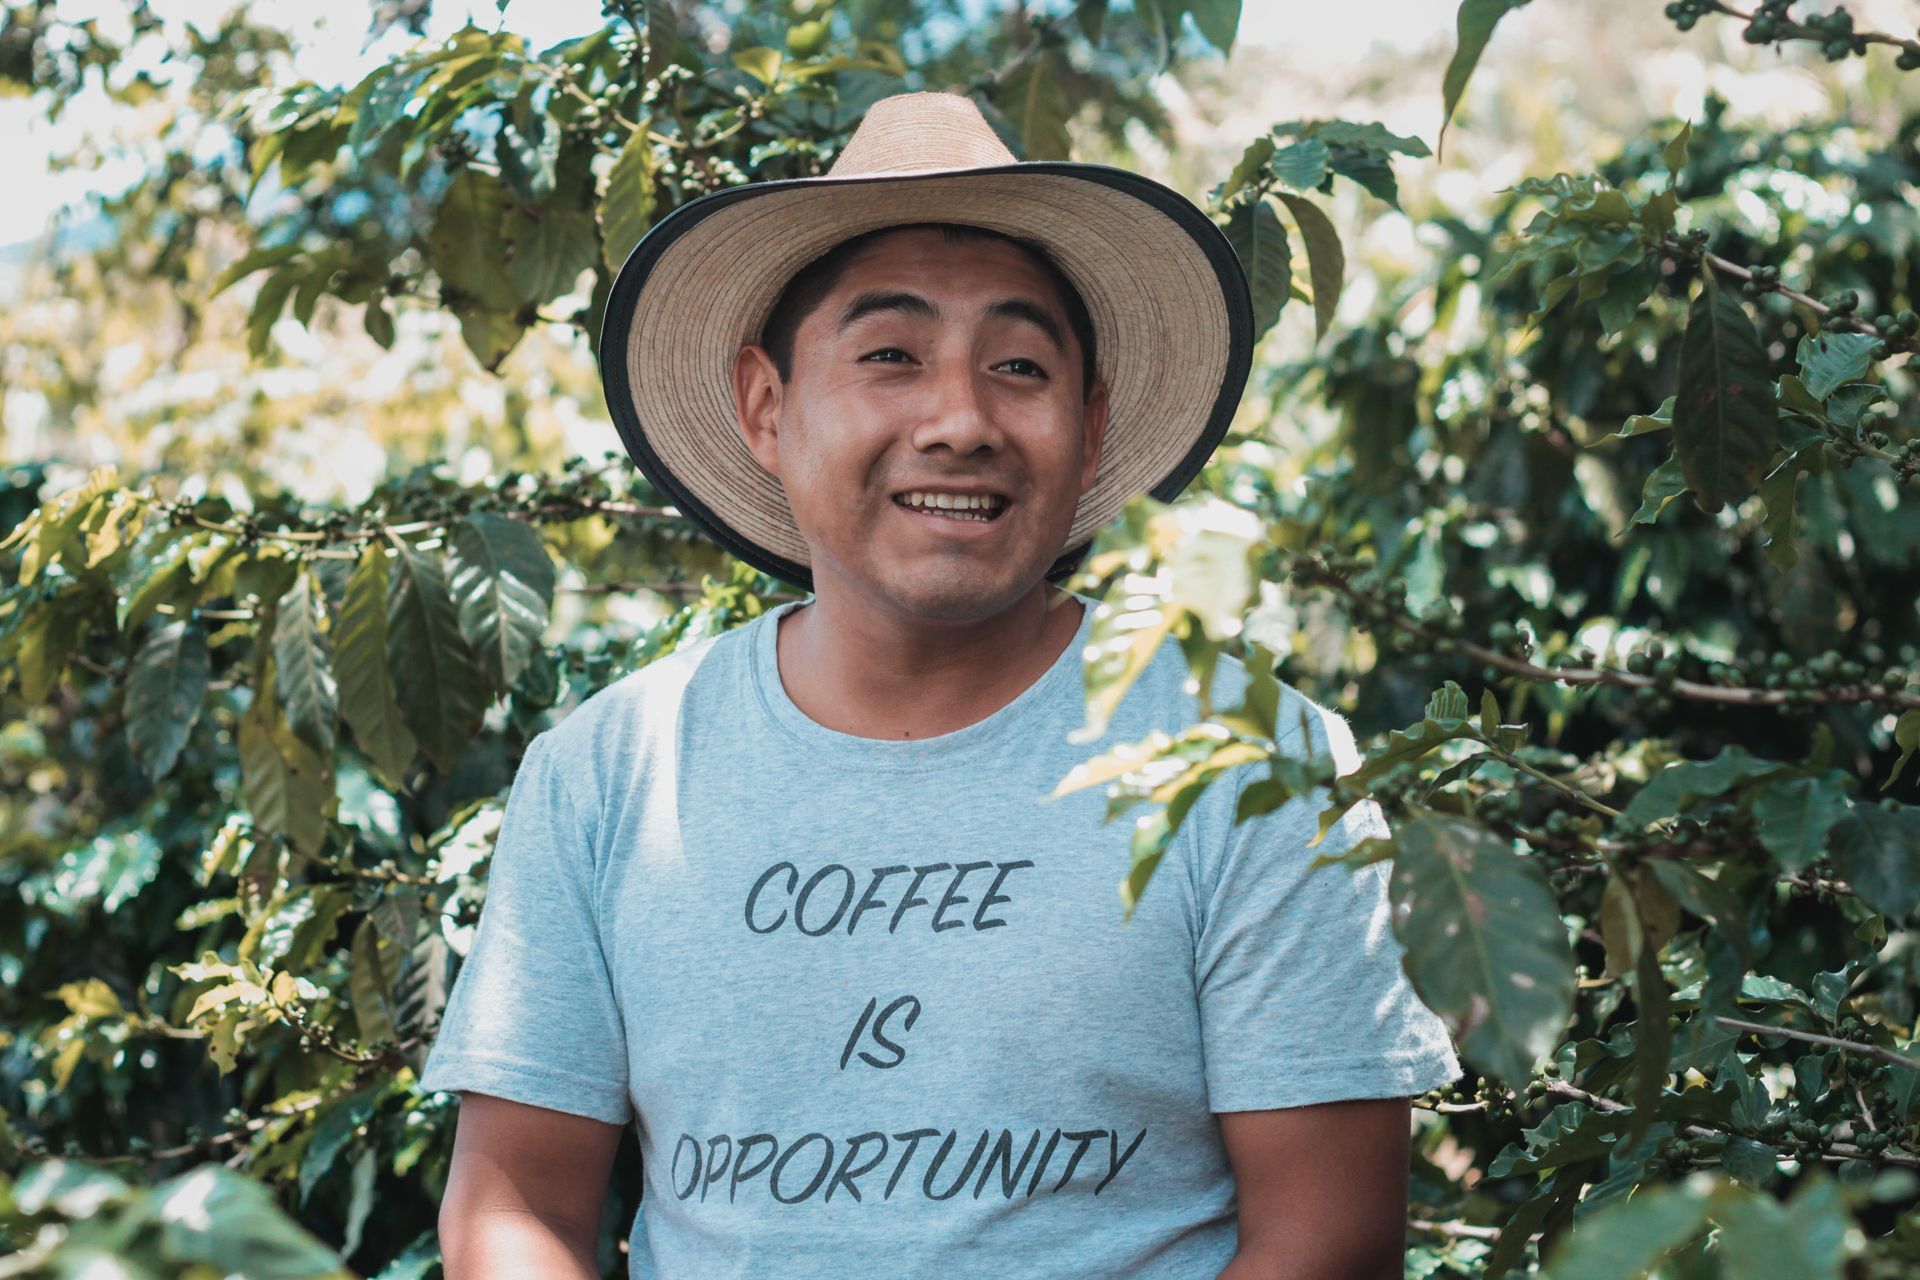 a man wearing a hat and a shirt that says coffee is opportunity